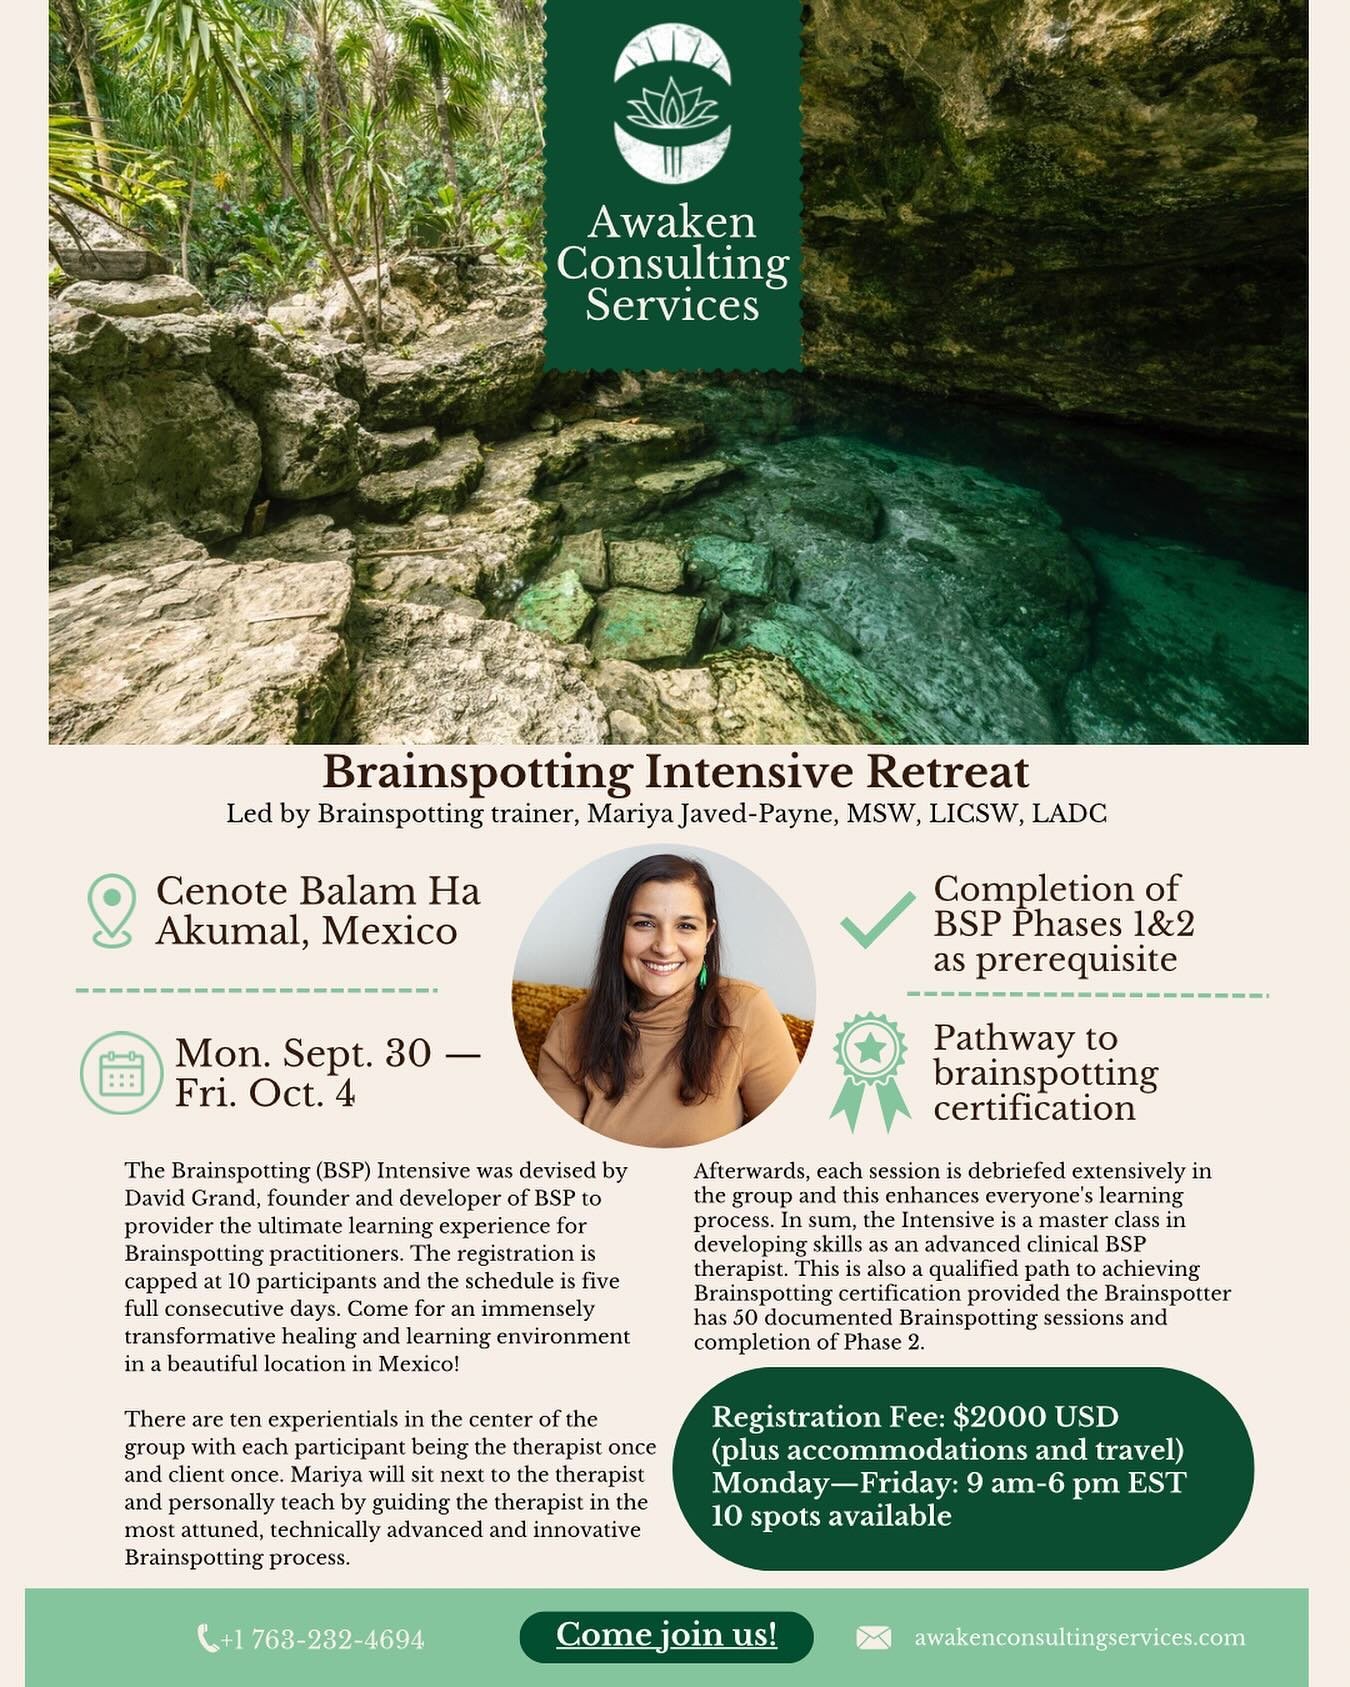 We are excited to announce our next Brainspotting Intensive Retreat at Cenote Balam Ha in Akumal, Mexico ☀️ This intensive training is a deep dive to advance your Brainspotting skills, experience deep healing in community with others, amplified by th